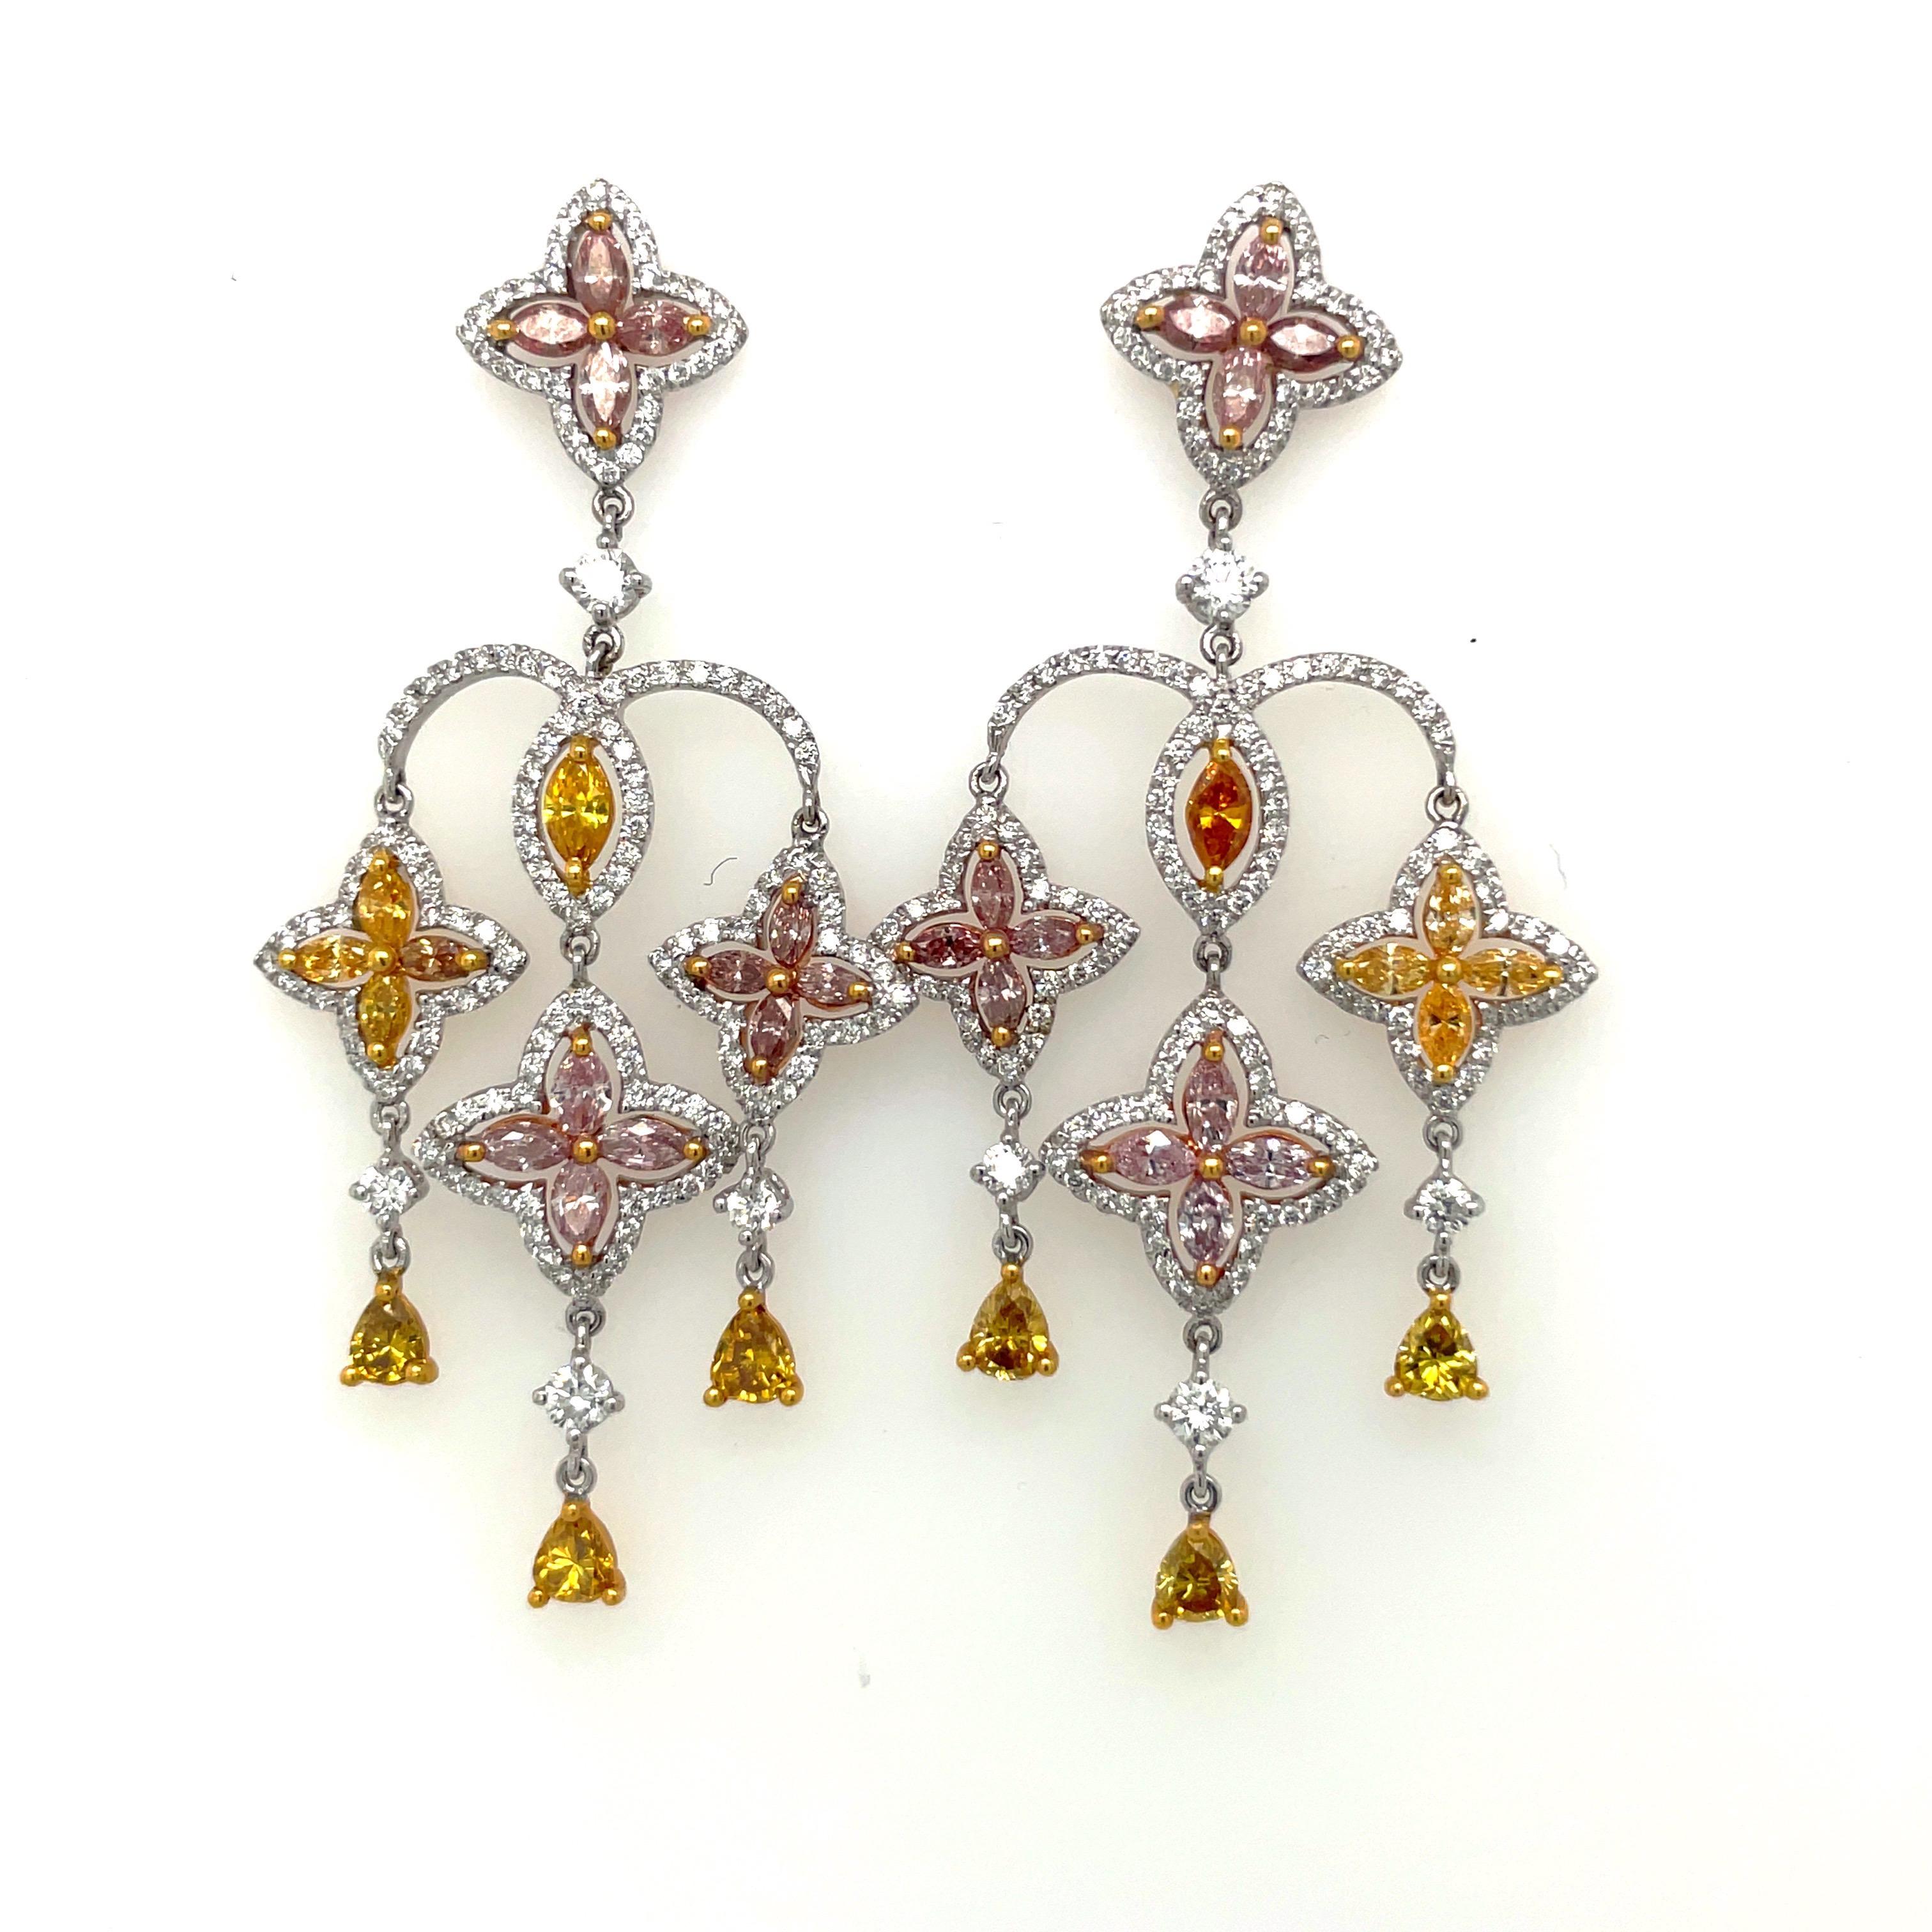 Chandelier earrings with three rows of fancy color diamonds in a arabesque motif, connected with a pavé of round brilliant white diamonds. Set in 18-karat gold. Approximately 2.25″ long.

Fancy color diamond weight: 3.21 total carats.
White diamond